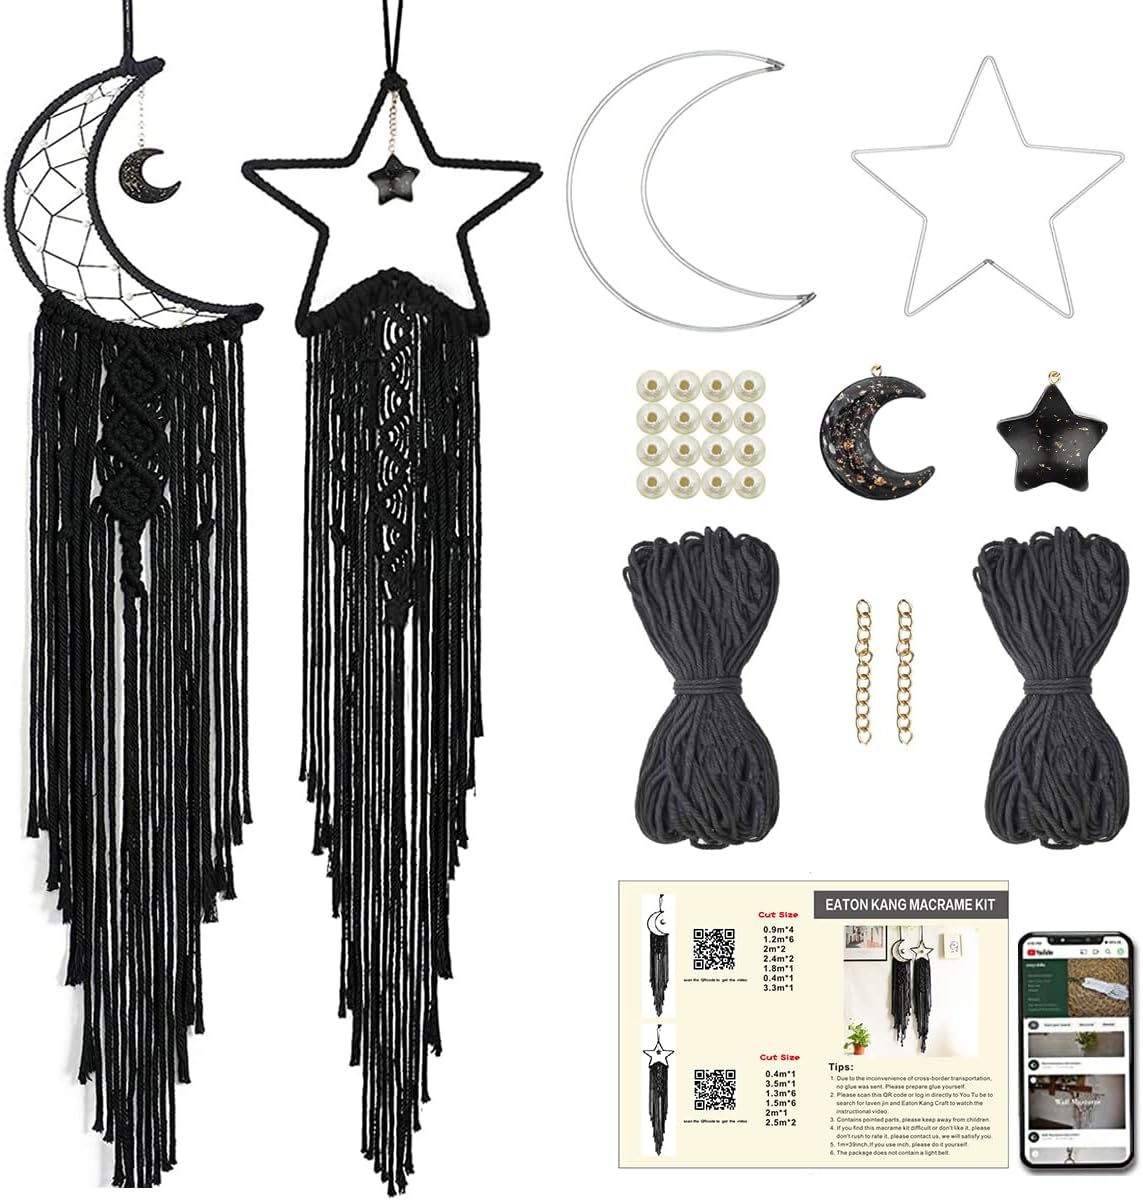 2 in 1 Macrame Kit, Black Moon+Star Macrame Kits for Adults Beginners, Includes Macrame Cord and Instruction with Video, Macrame Wall Hanging Supplies, Craft Kits for Adults DIY Dream Catcher Kit